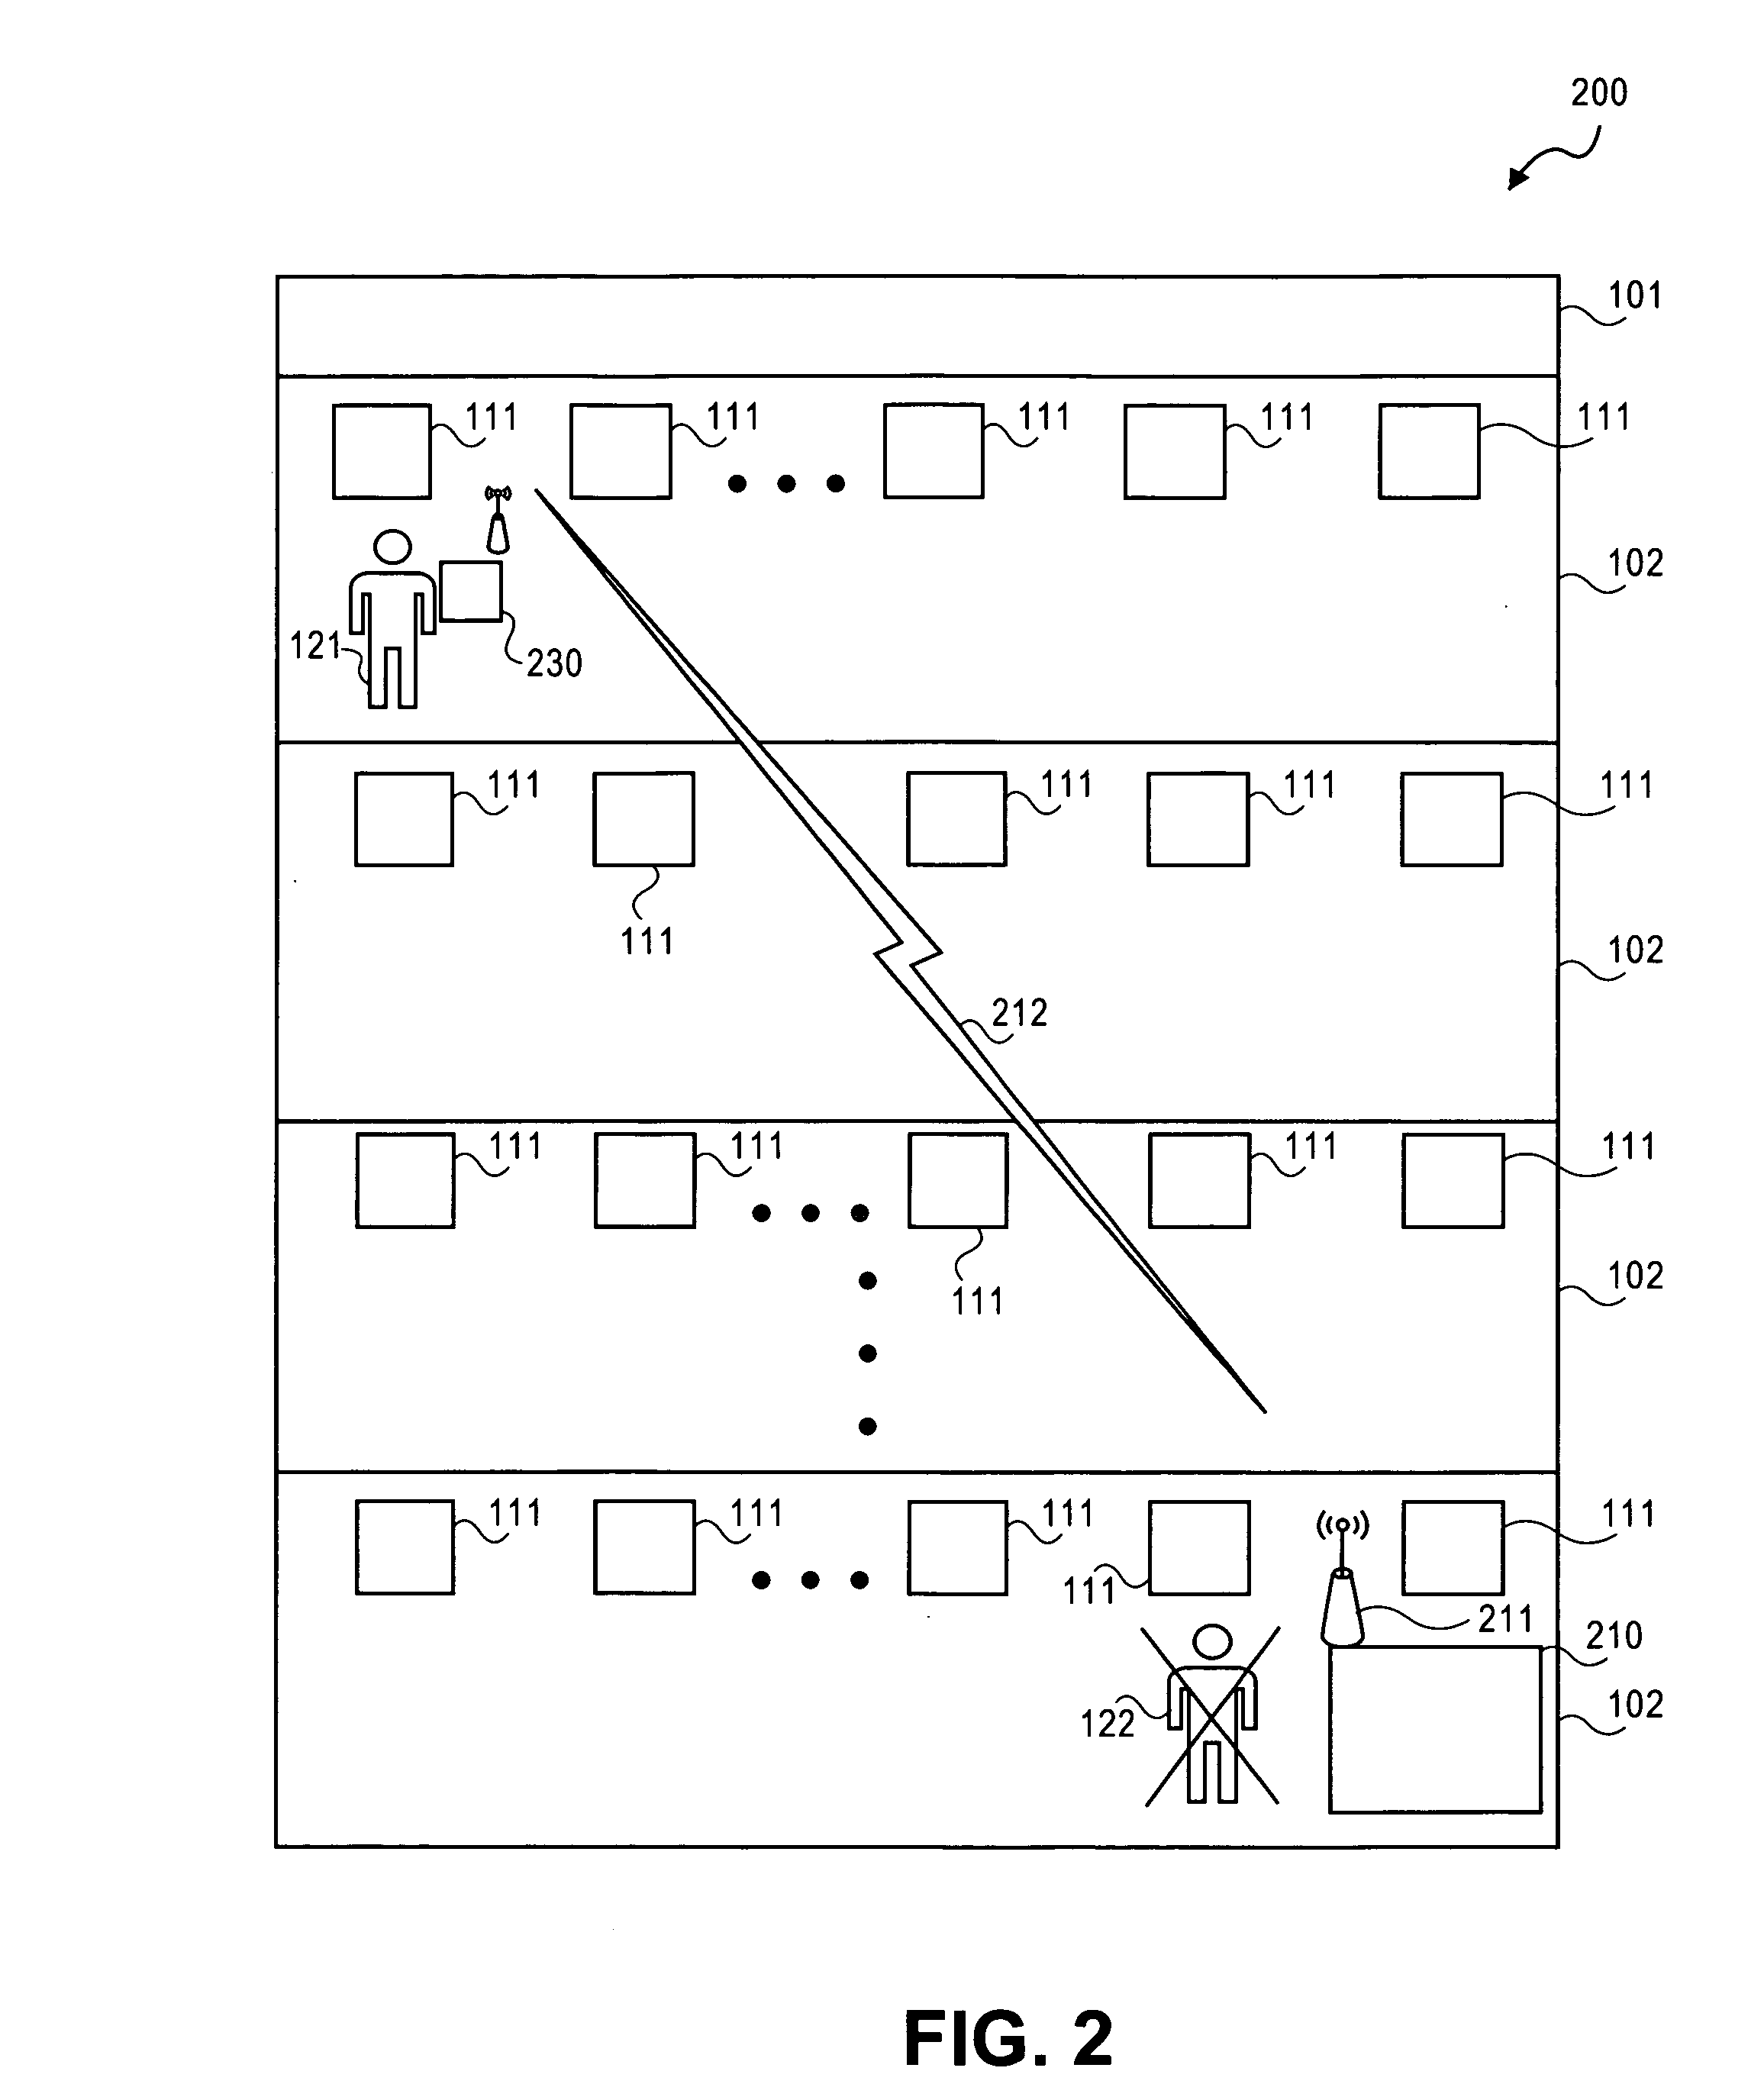 Method and apparatus for authenicated on-site testing, inspection, servicing and control of life-safety equipment and reporting of same using a remote accessory